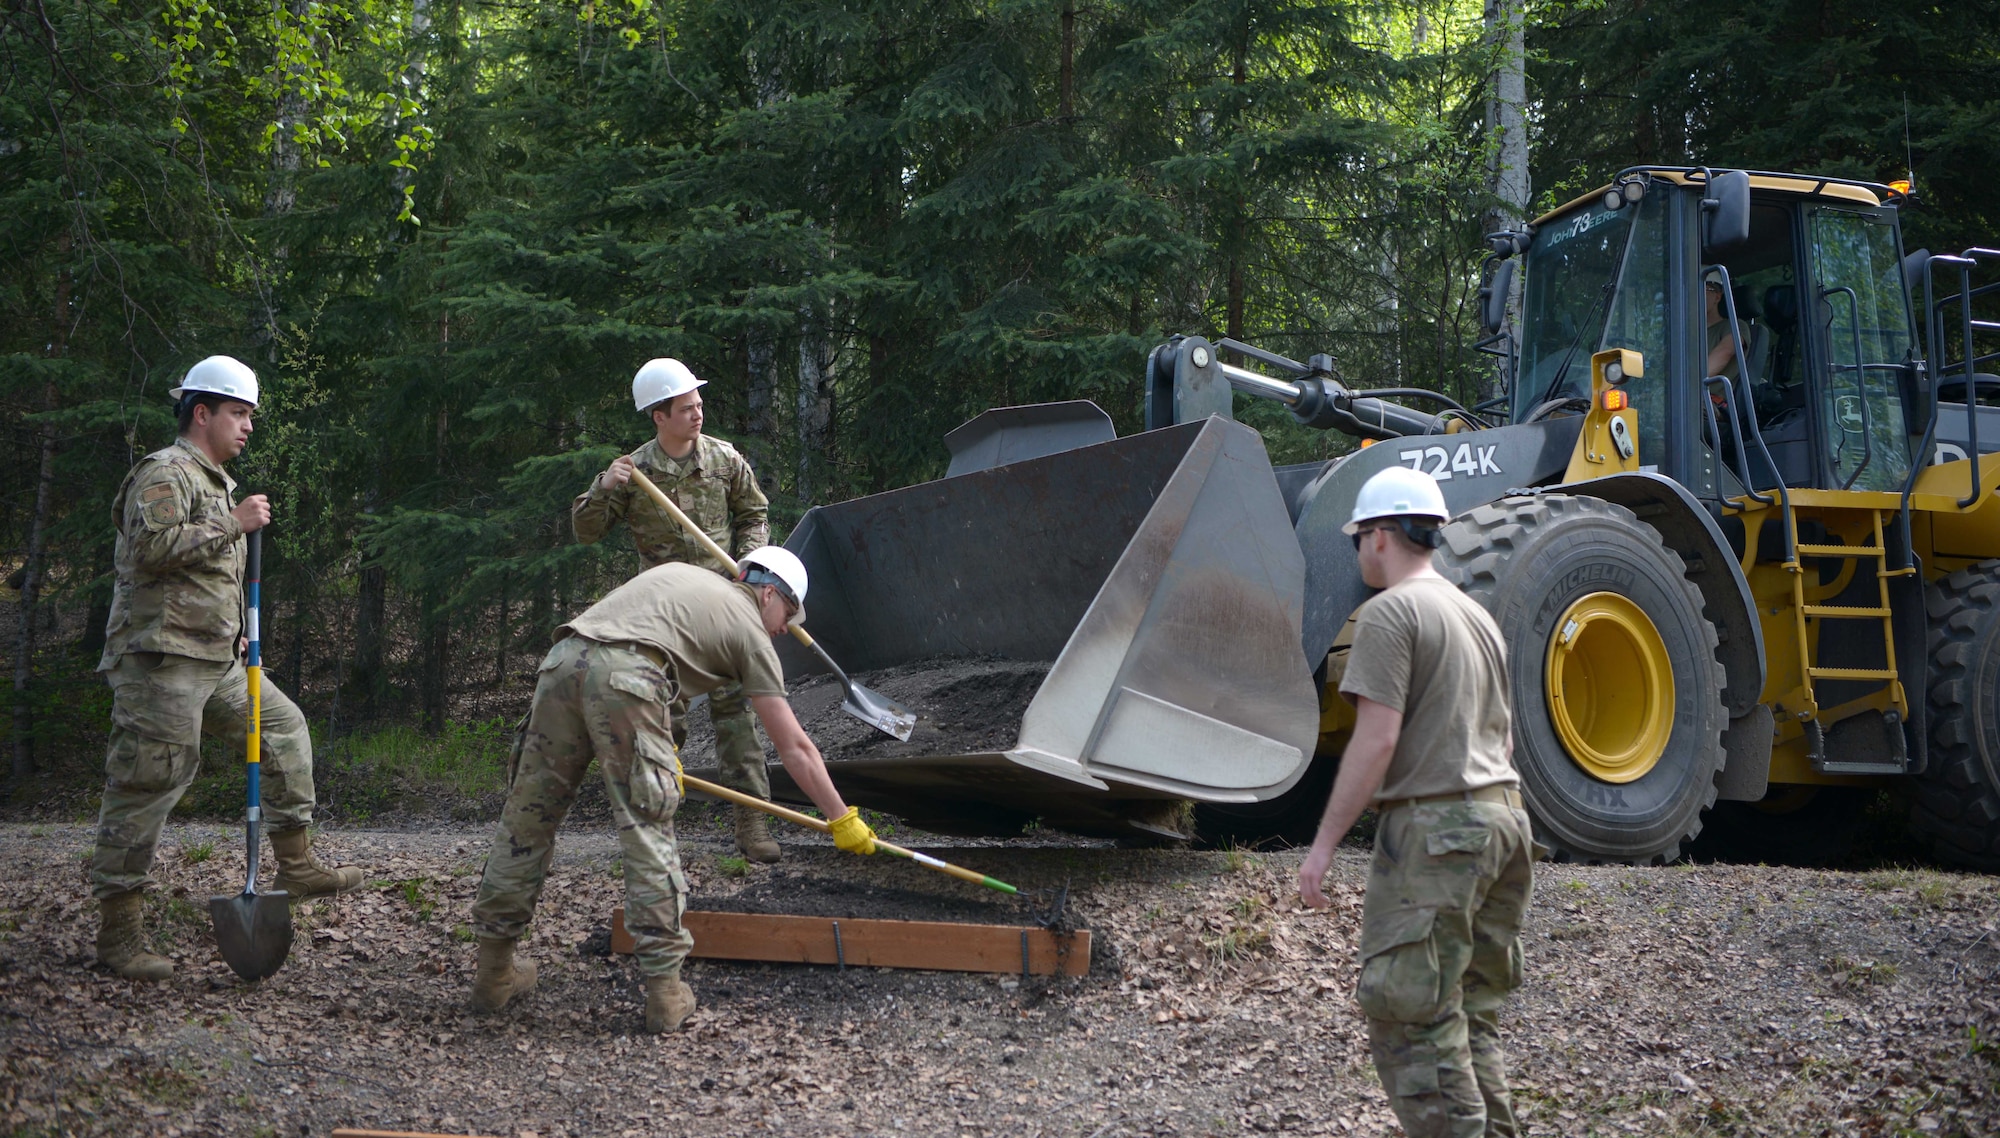 U.S. Air Force Airmen assigned to the 354th Civil Engineer Squadron construct steps during a troop training project May 26, 2021, at the Birch Lake Military Recreation Area, Alaska. To give the troops a sense of competition, the squadron encouraged the teams to complete one small personal renovation in addition to their assigned projects. Most teams built a bench by the cabin they renovated, while others took a different approach such as adding gravel steps to make it easier for people to traverse the campgrounds. (U.S. Air Force photo by Senior Airman Beaux Hebert)